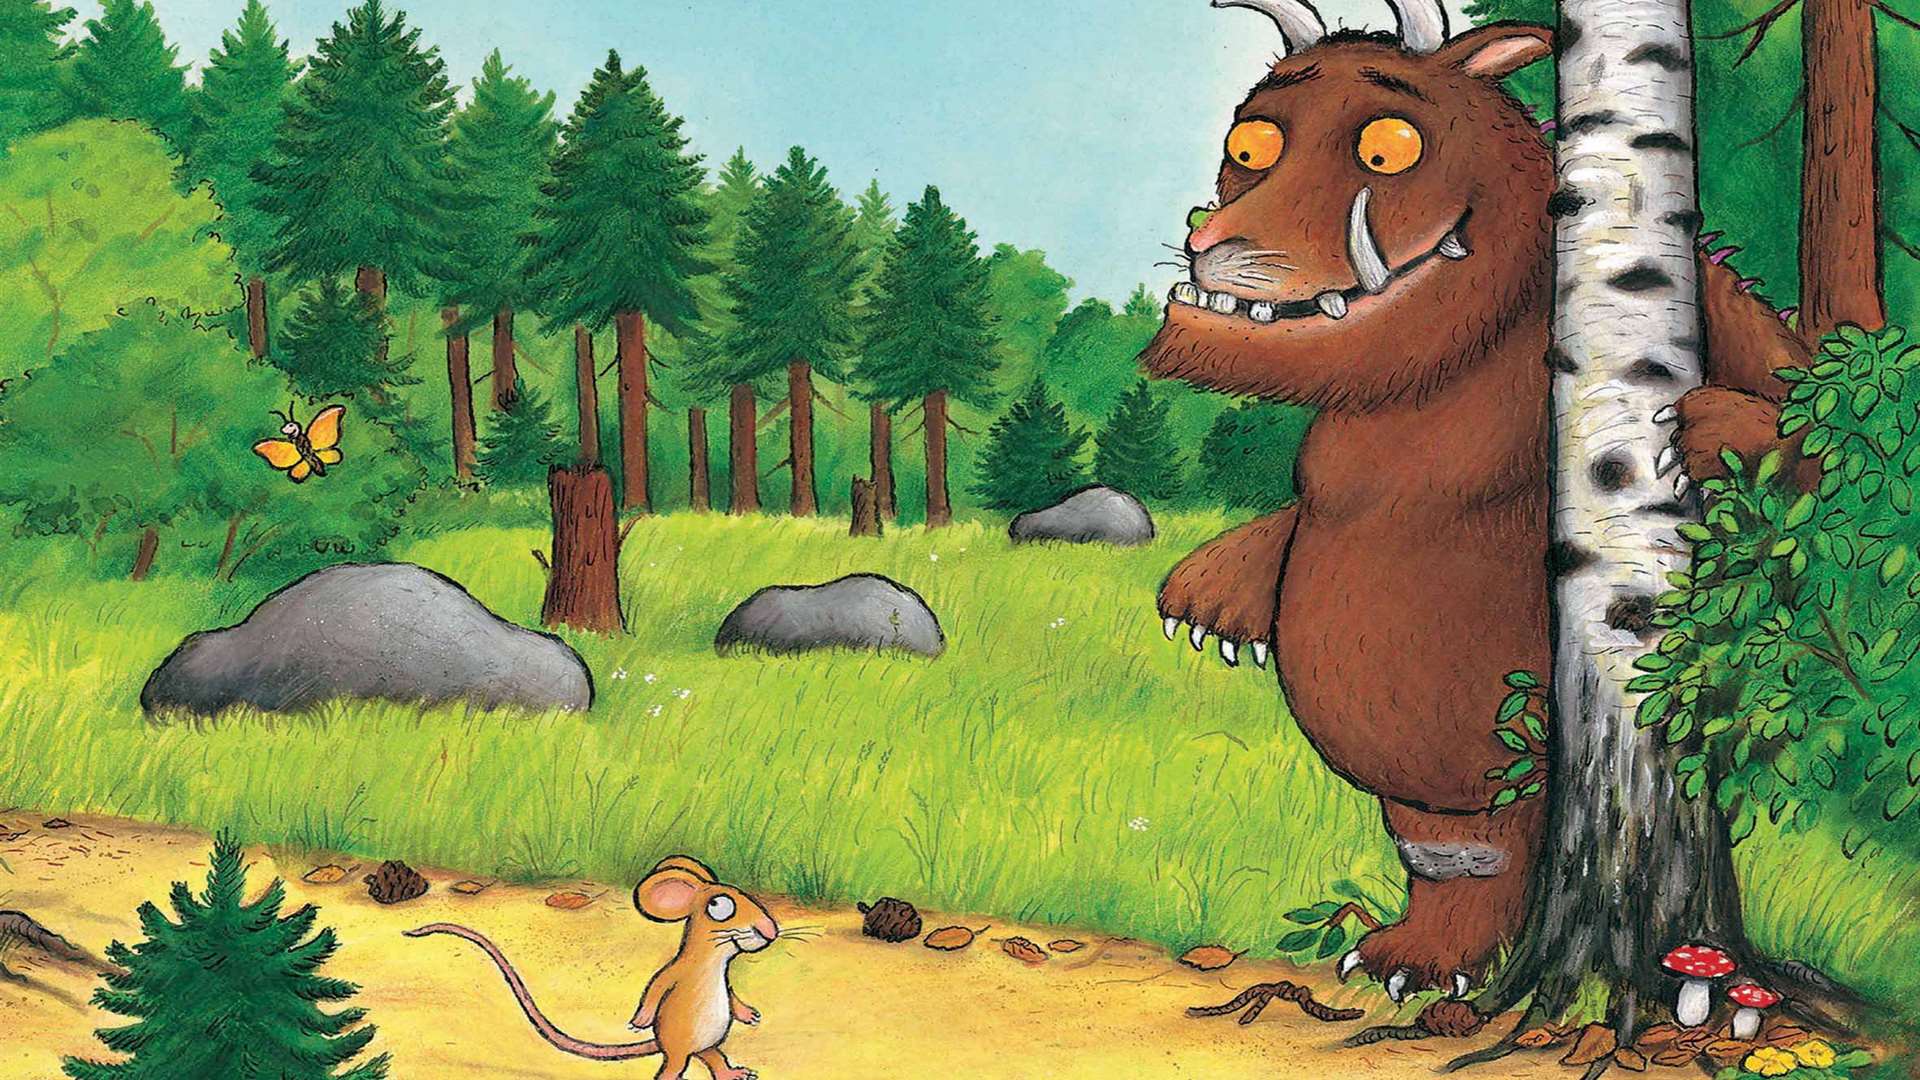 Get up close to the Gruffalo